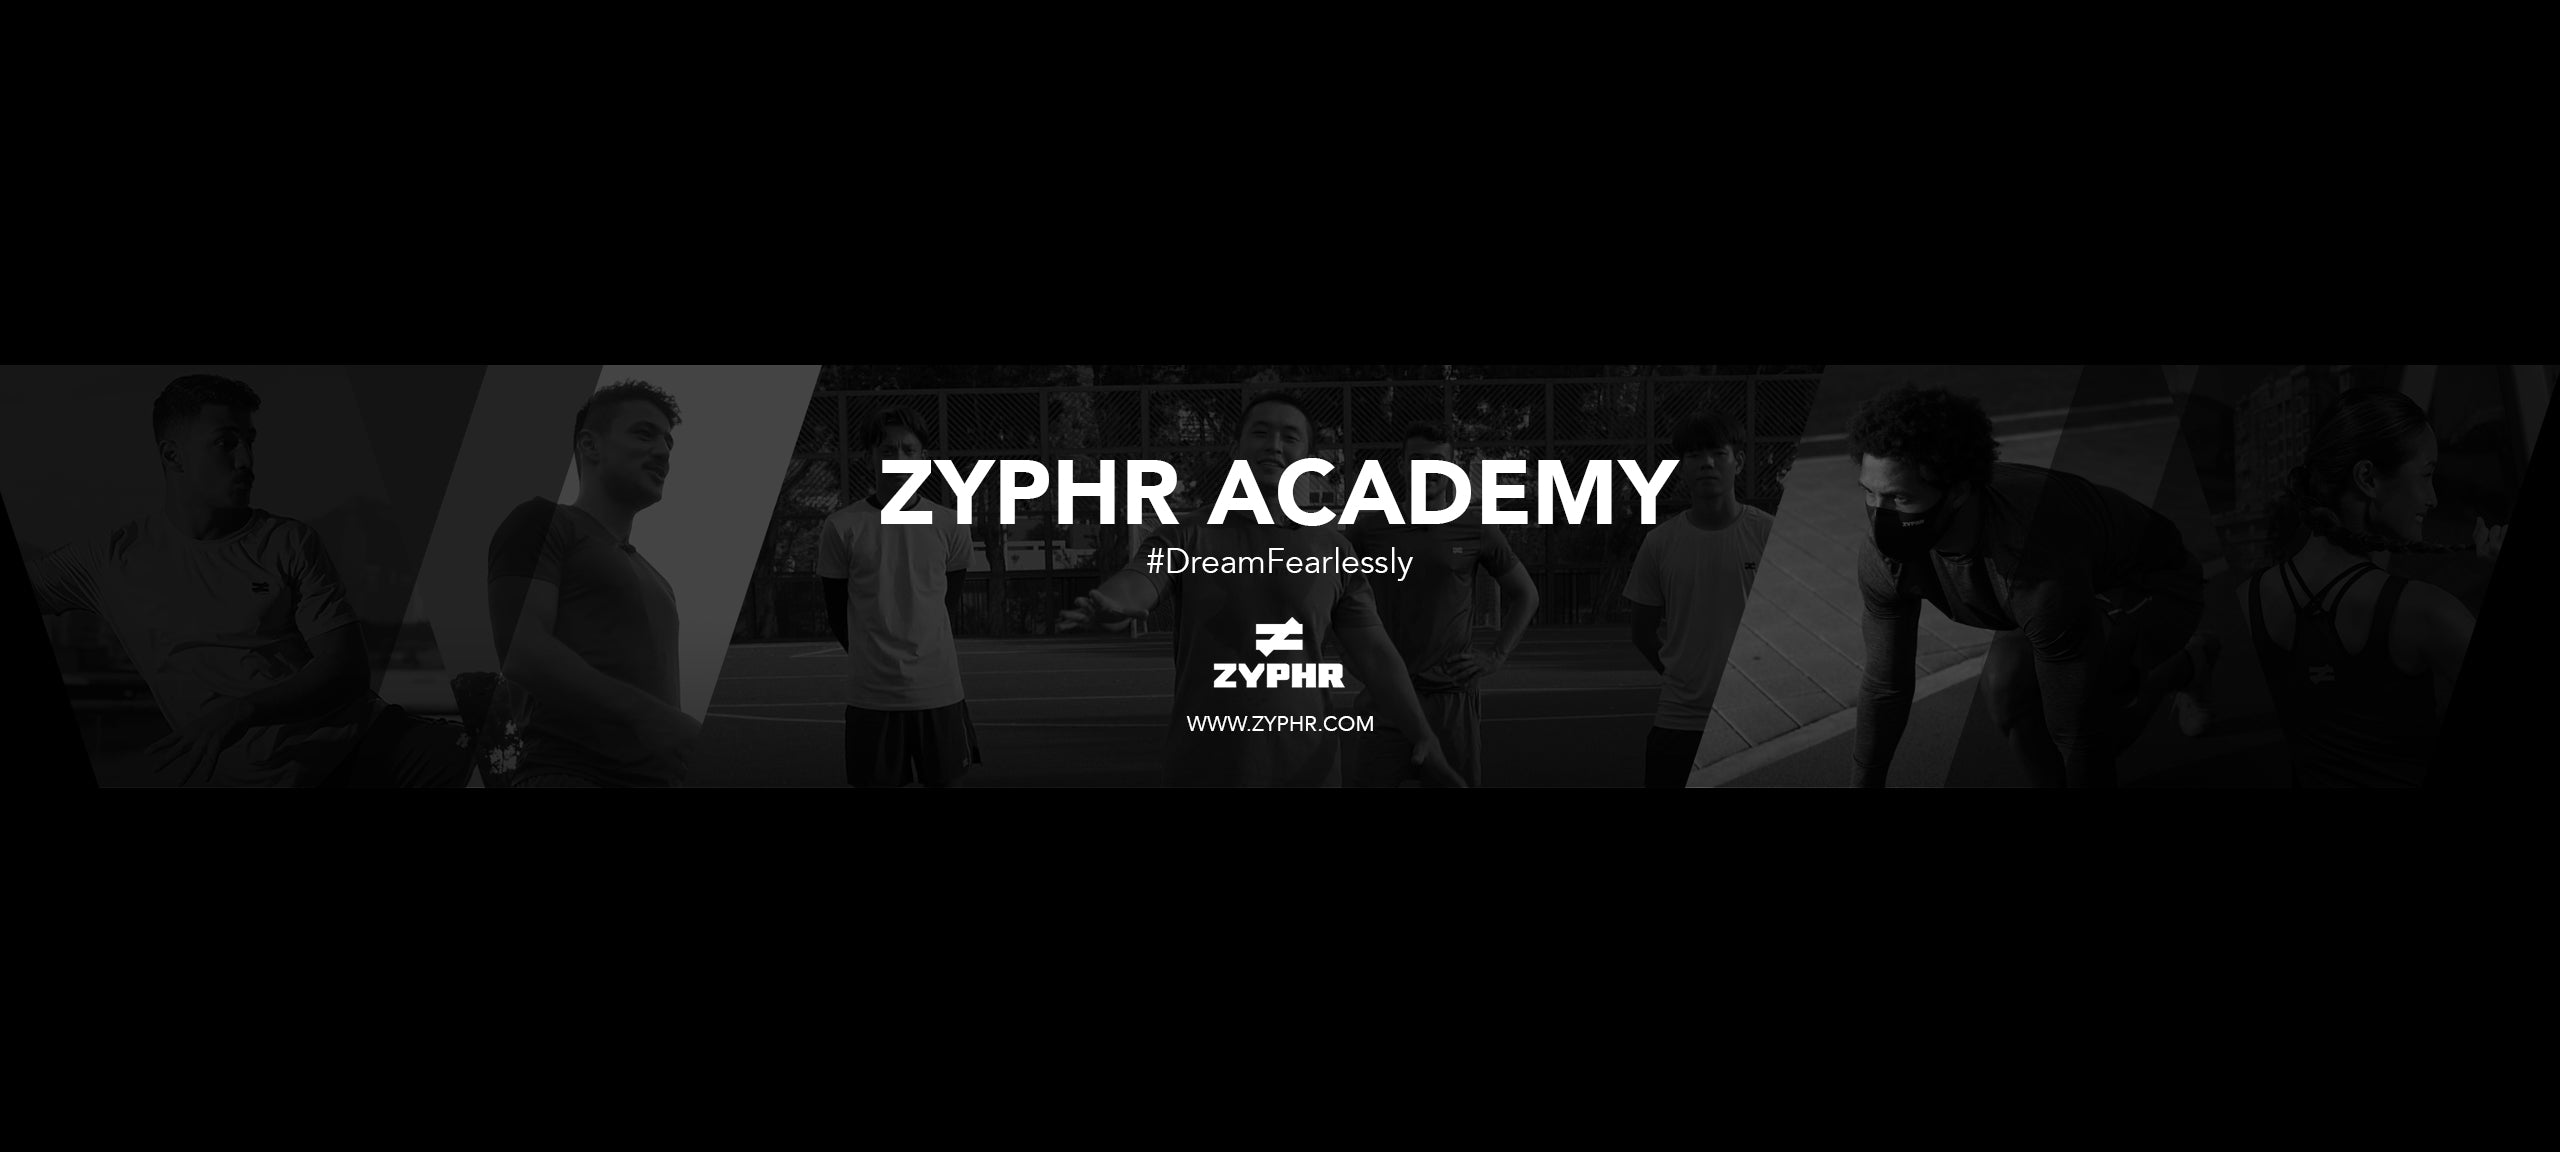 Zyphr Academy – All Inclusive Football Entertainment and Masterclass